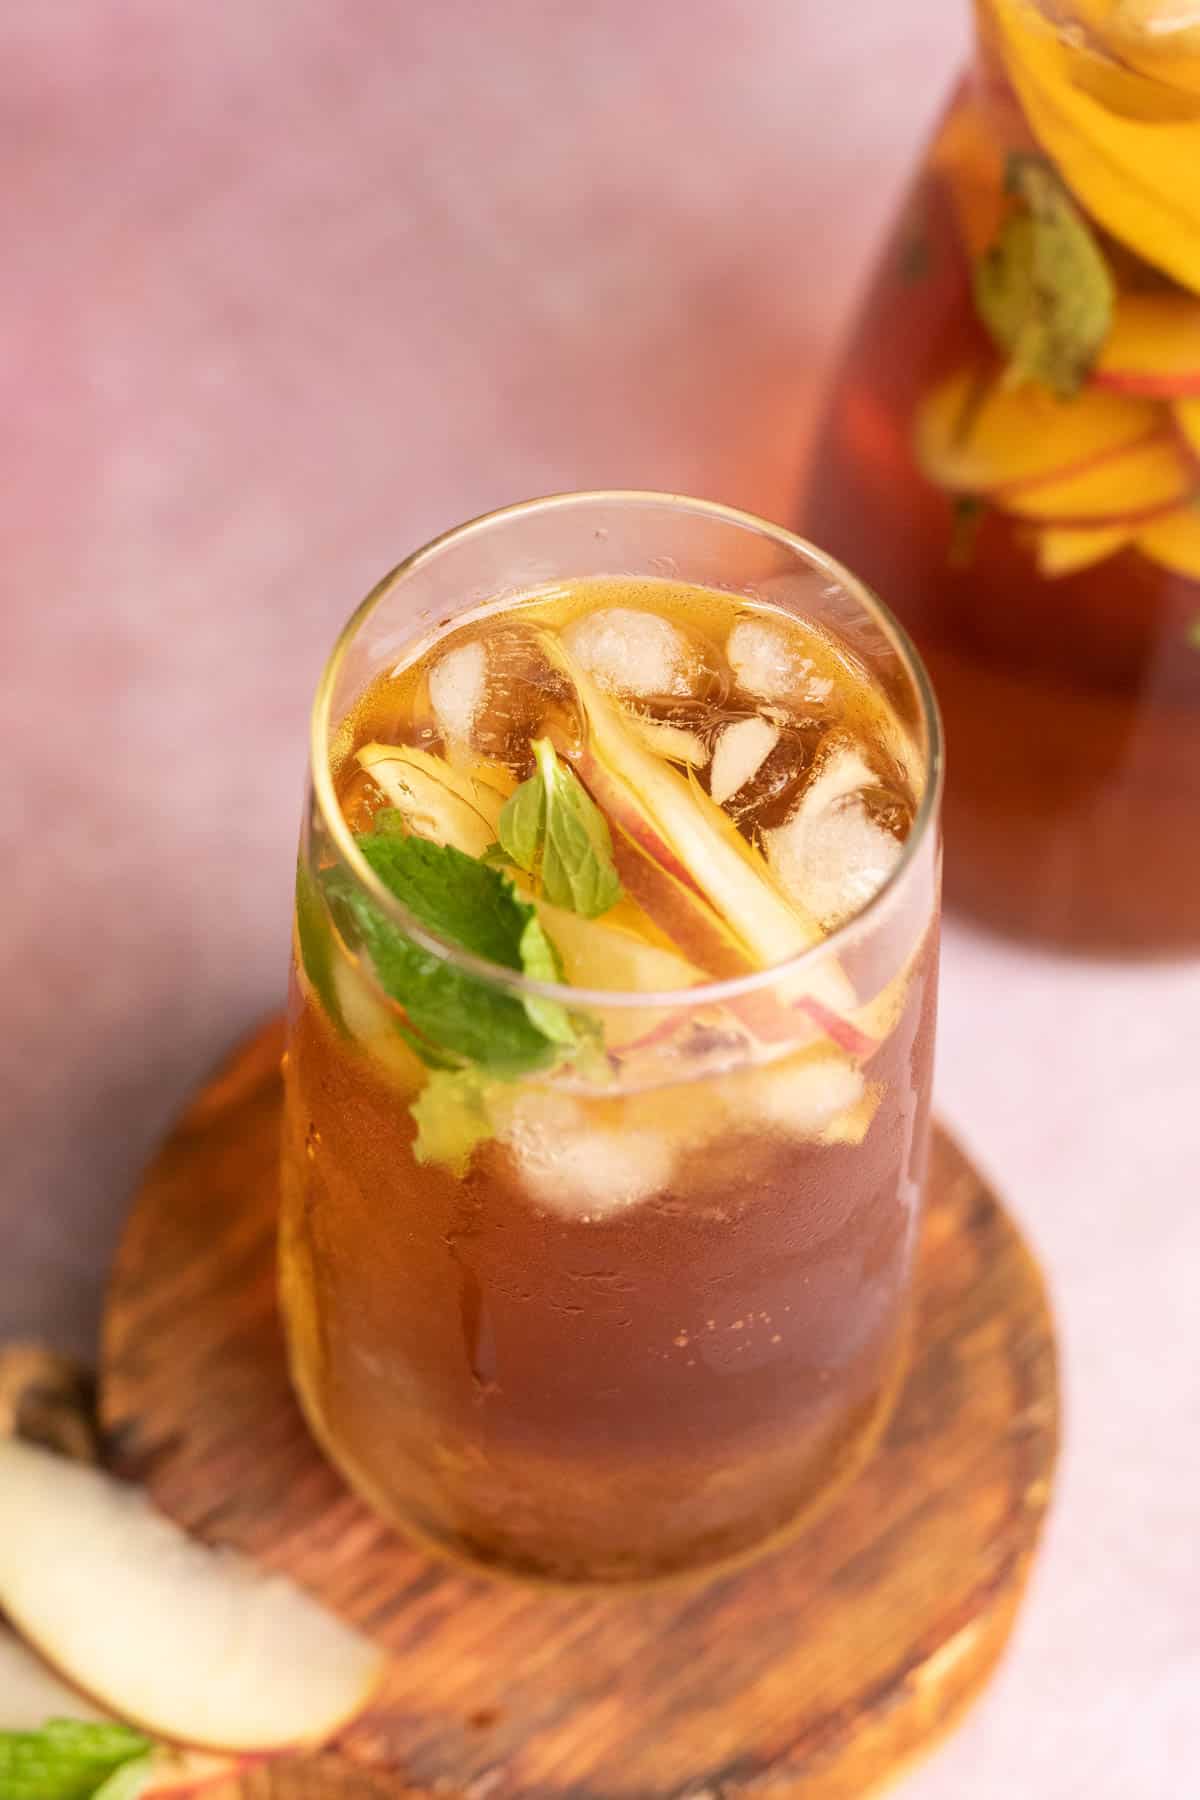 A glass of Virgin Apple Iced Tea with slices of apple inside